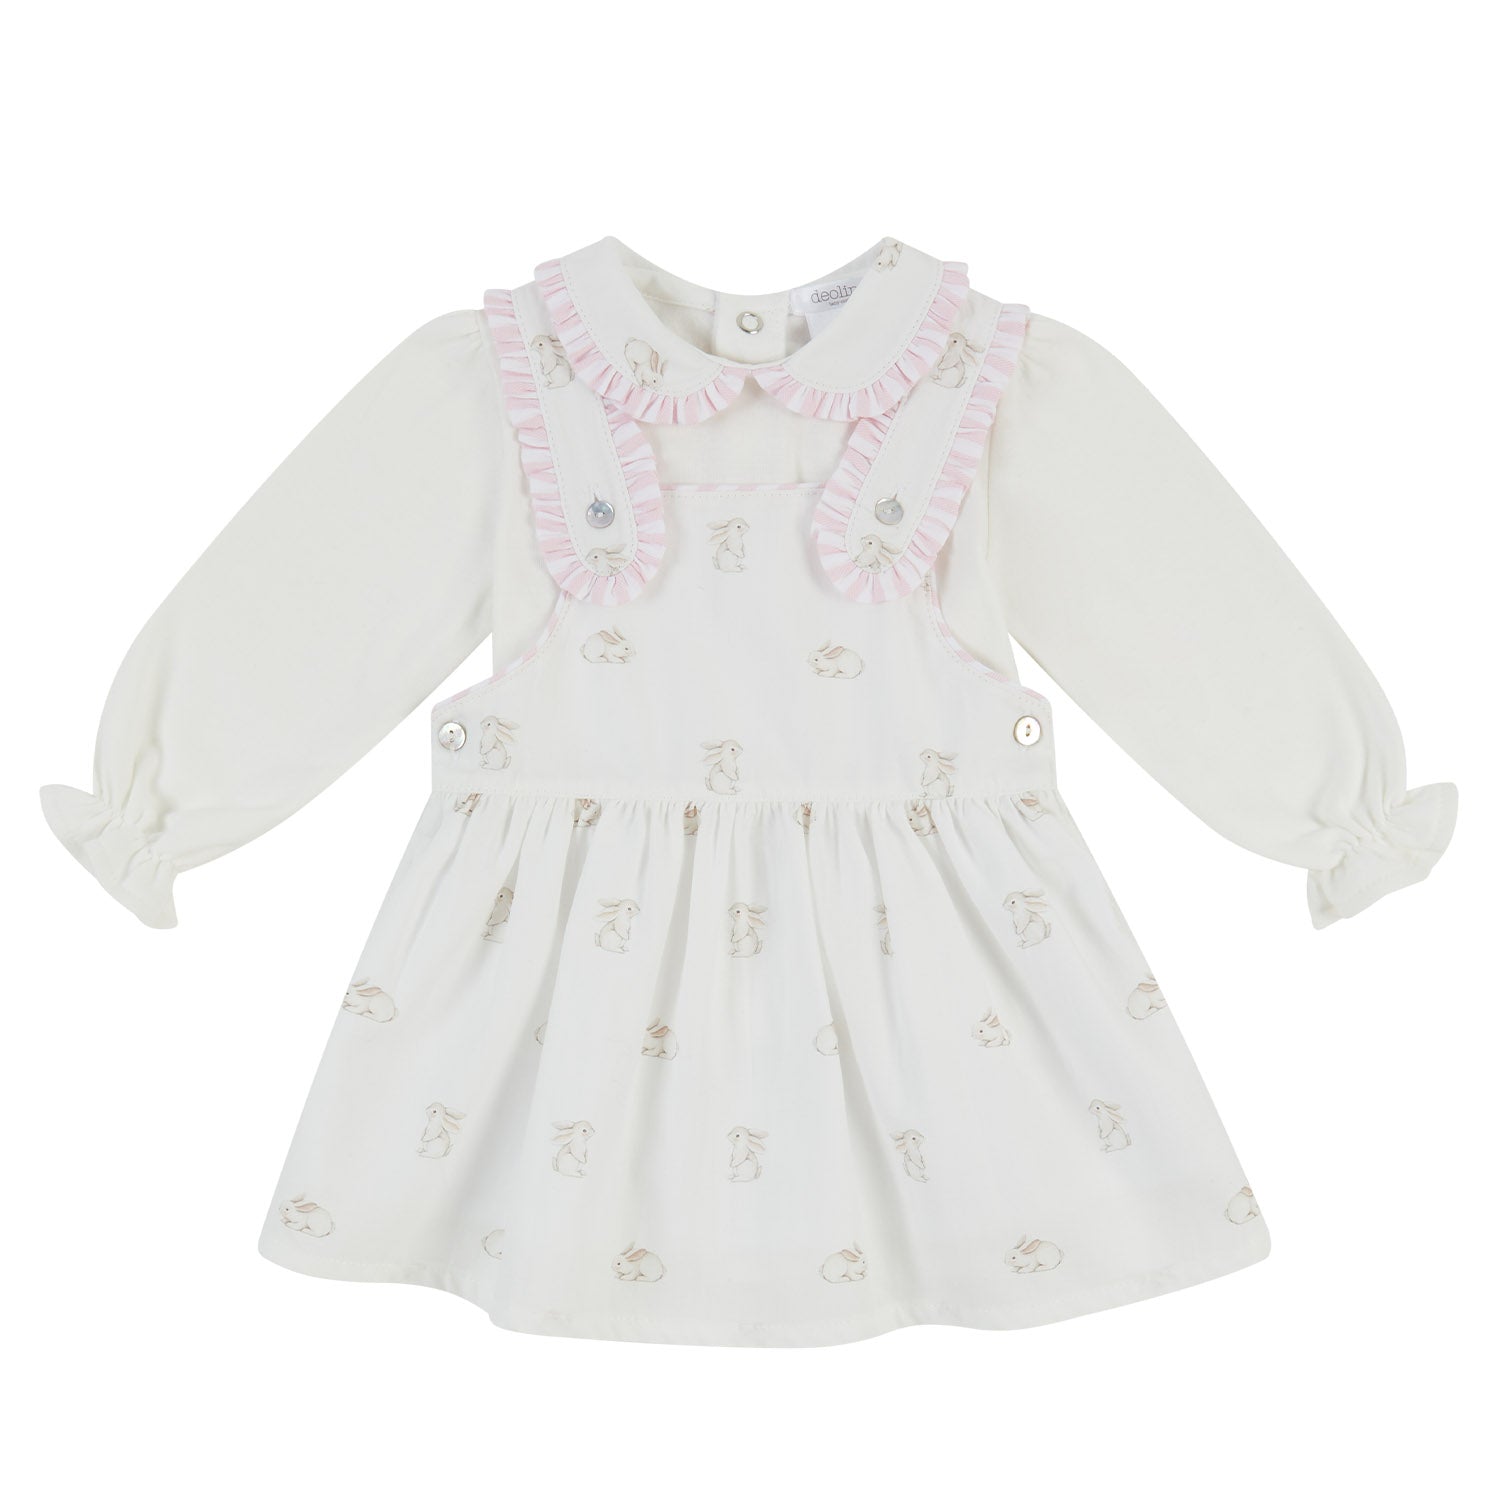 Pink Bunny Pinafore Outfit